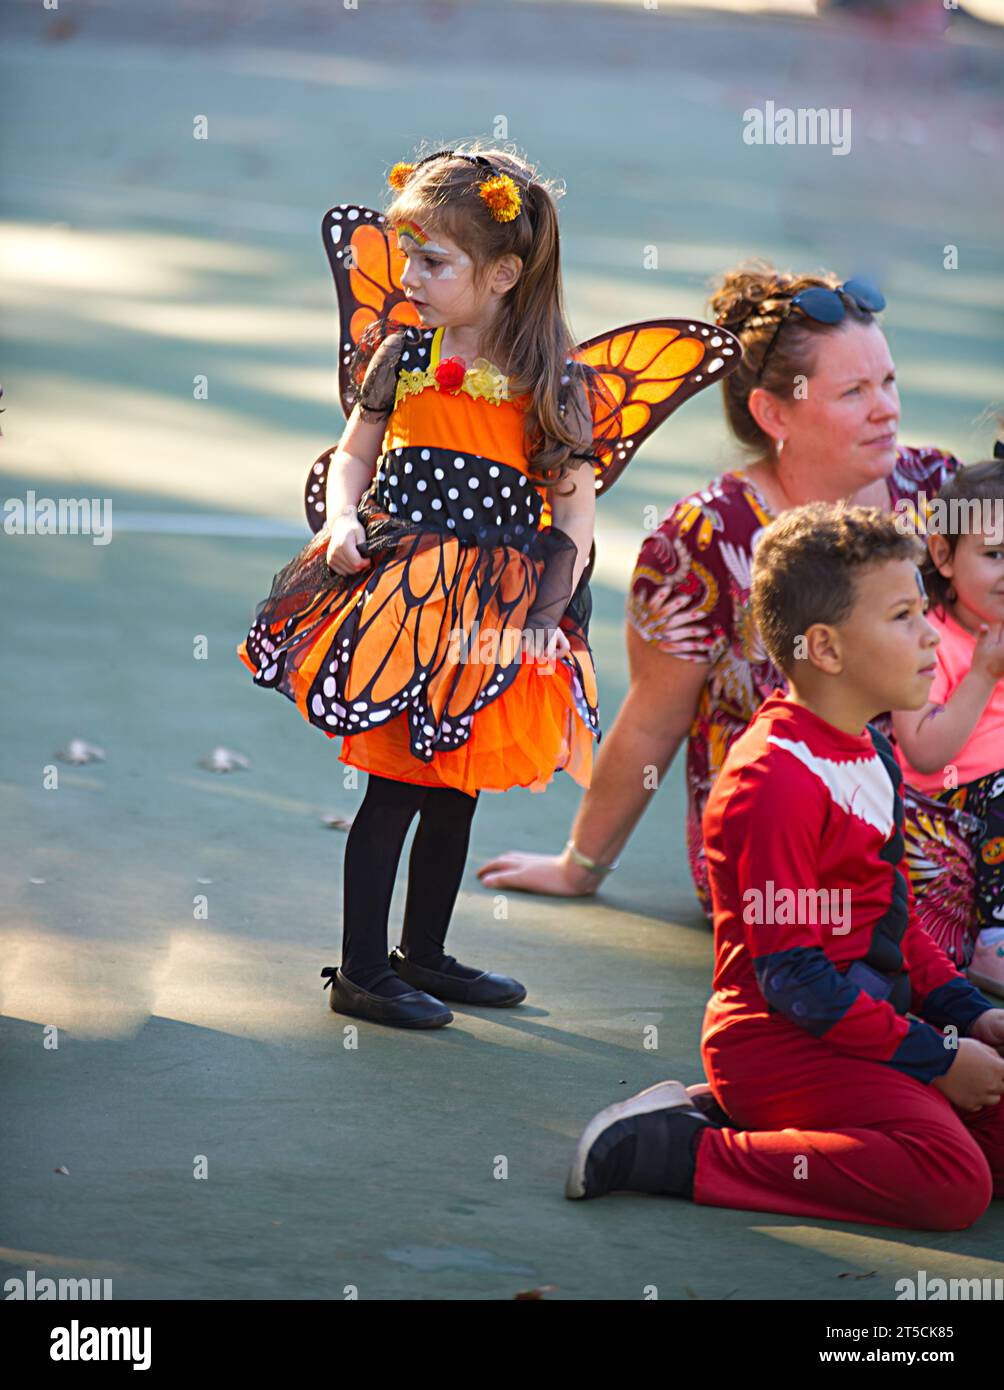 Halloweenpalooza - Dennis, Massachusetts on Cape Cod.  A family celebration of Halloween. A young butterfly amongst the crowd. Stock Photo